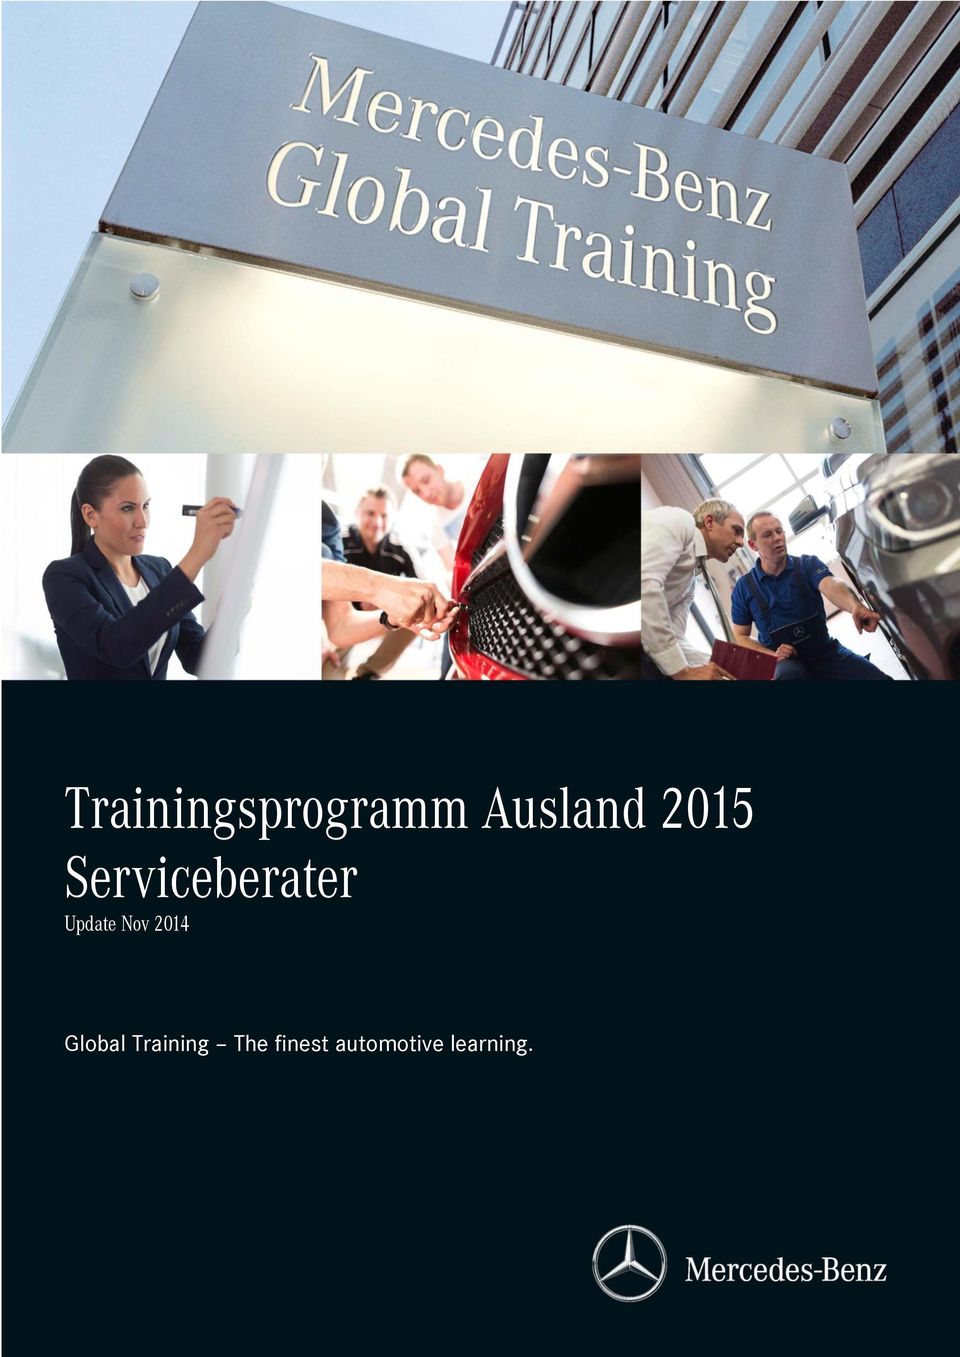 Global Training The finest